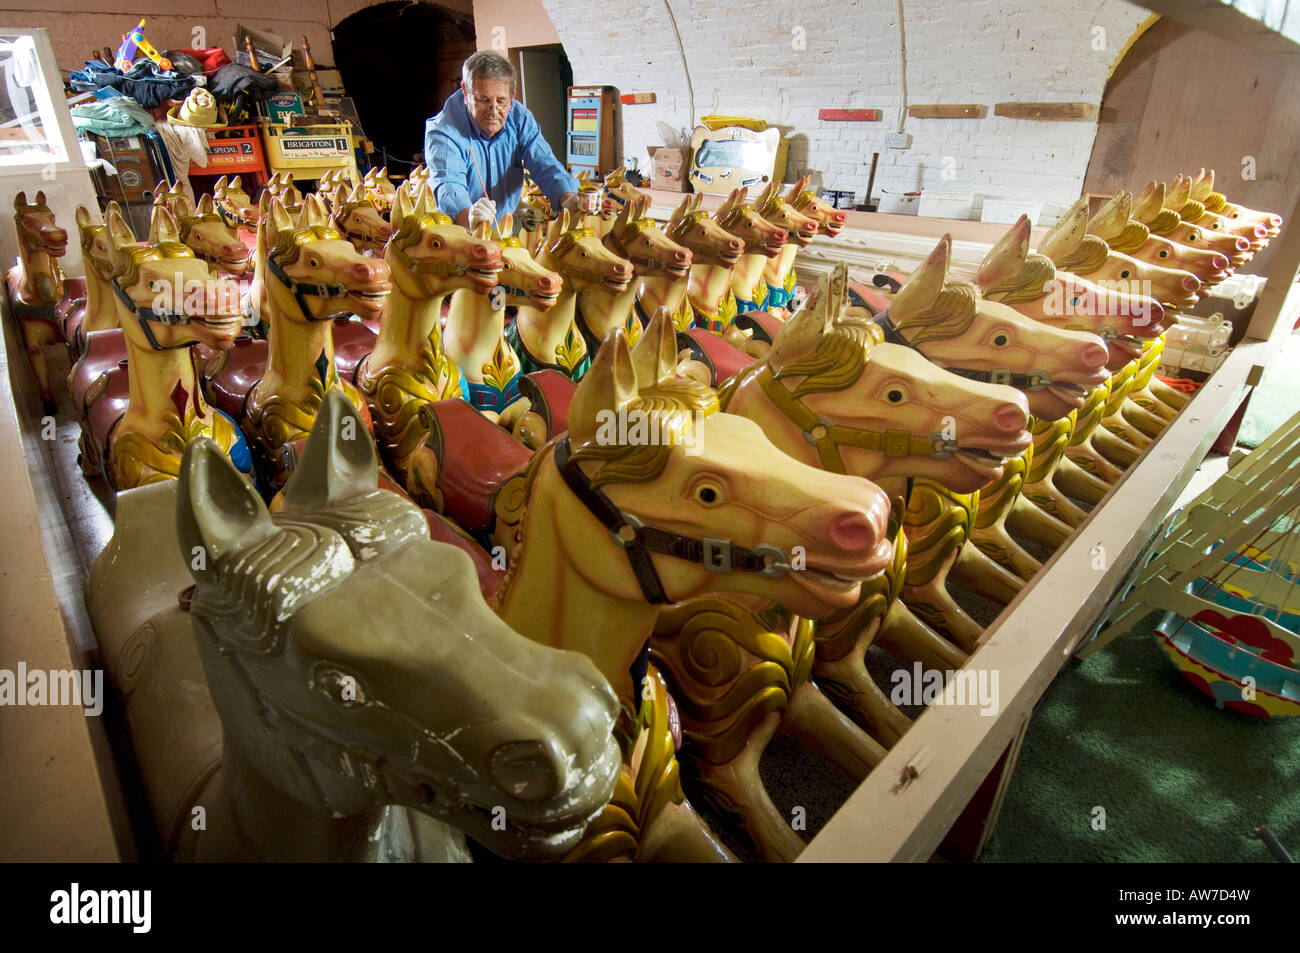 Fairground carousel horses in storage having winter repairs done out of season. Stock Photo